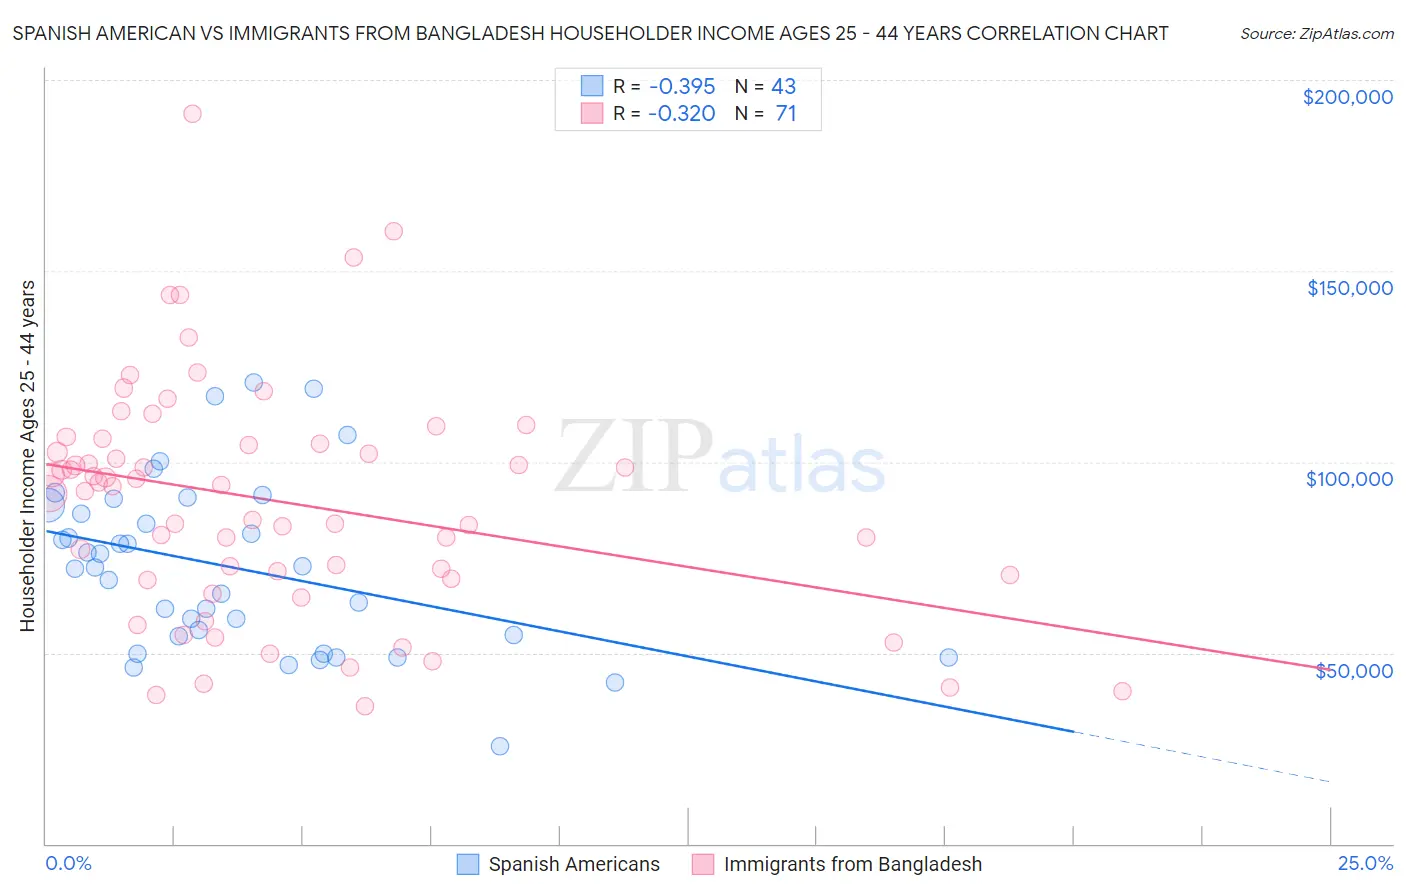 Spanish American vs Immigrants from Bangladesh Householder Income Ages 25 - 44 years